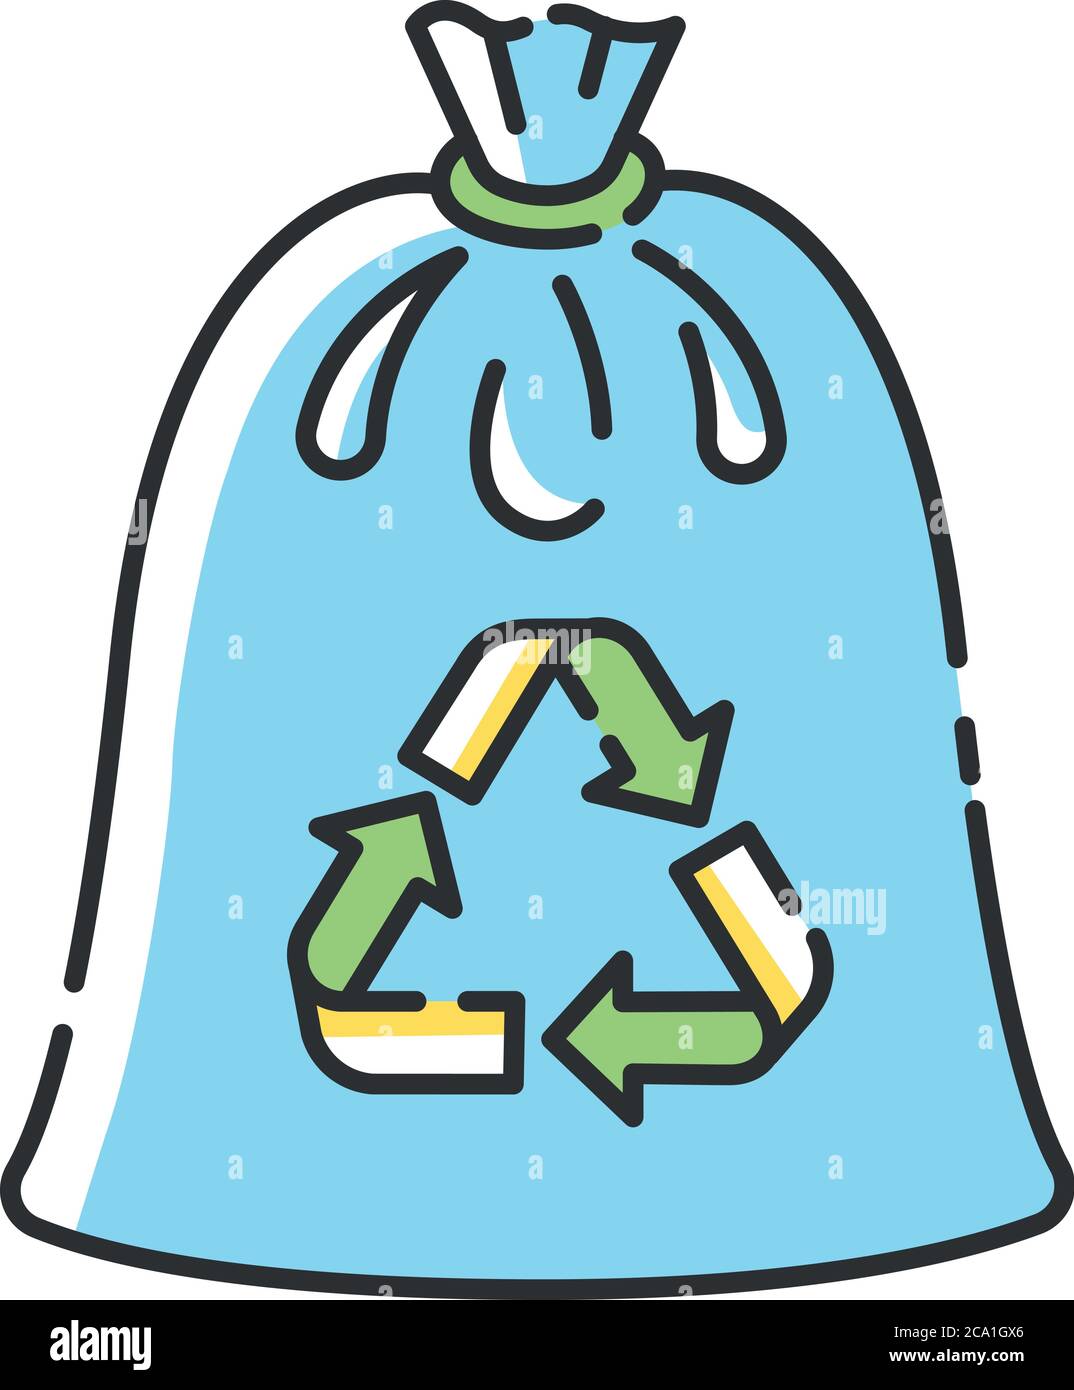 https://c8.alamy.com/comp/2CA1GX6/compostable-trash-bag-rgb-color-icon-waste-recycling-refusing-from-plastic-litter-bags-eco-friendly-biodegradable-materials-use-isolated-vector-il-2CA1GX6.jpg